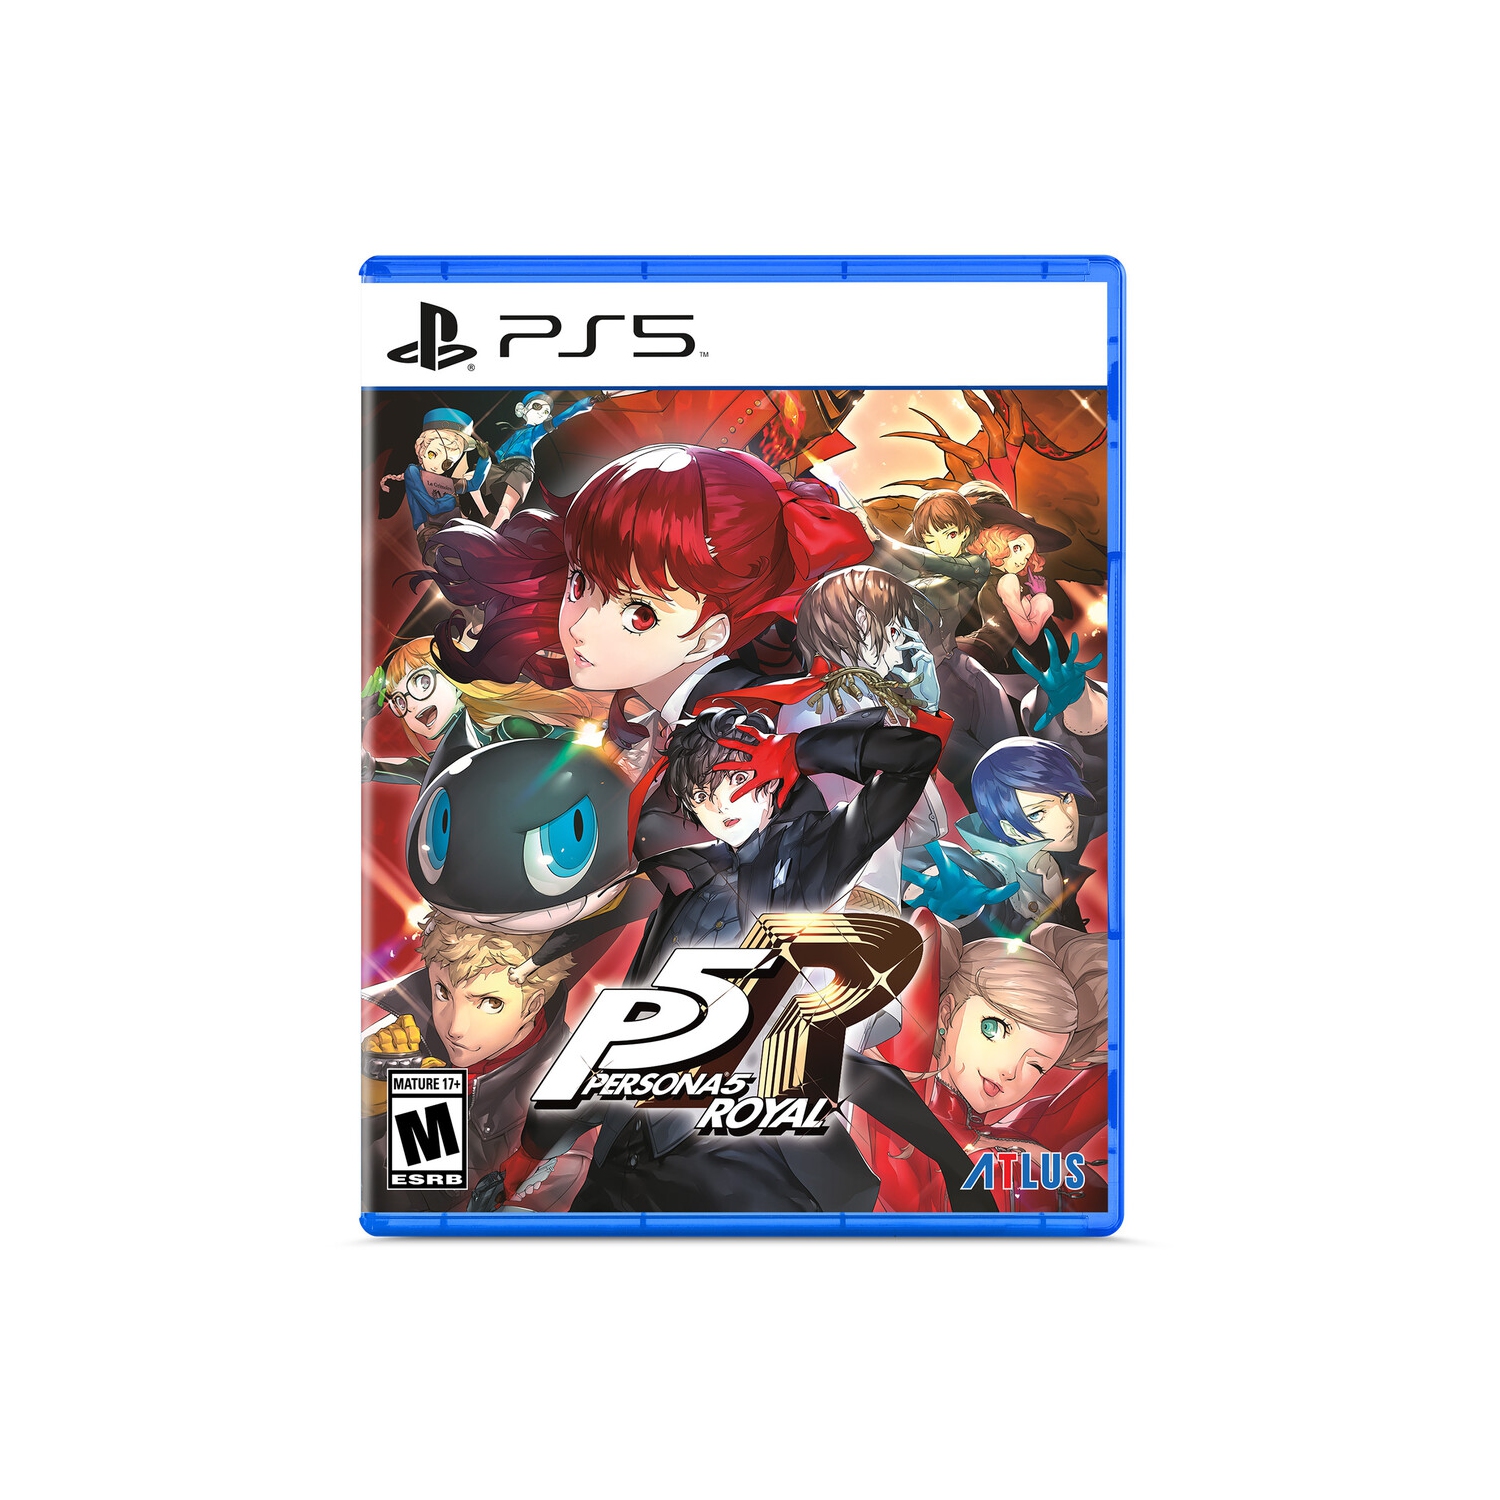 Persona 5 Royal - Steelbook Launch for PlayStation 5 [VIDEOGAMES]